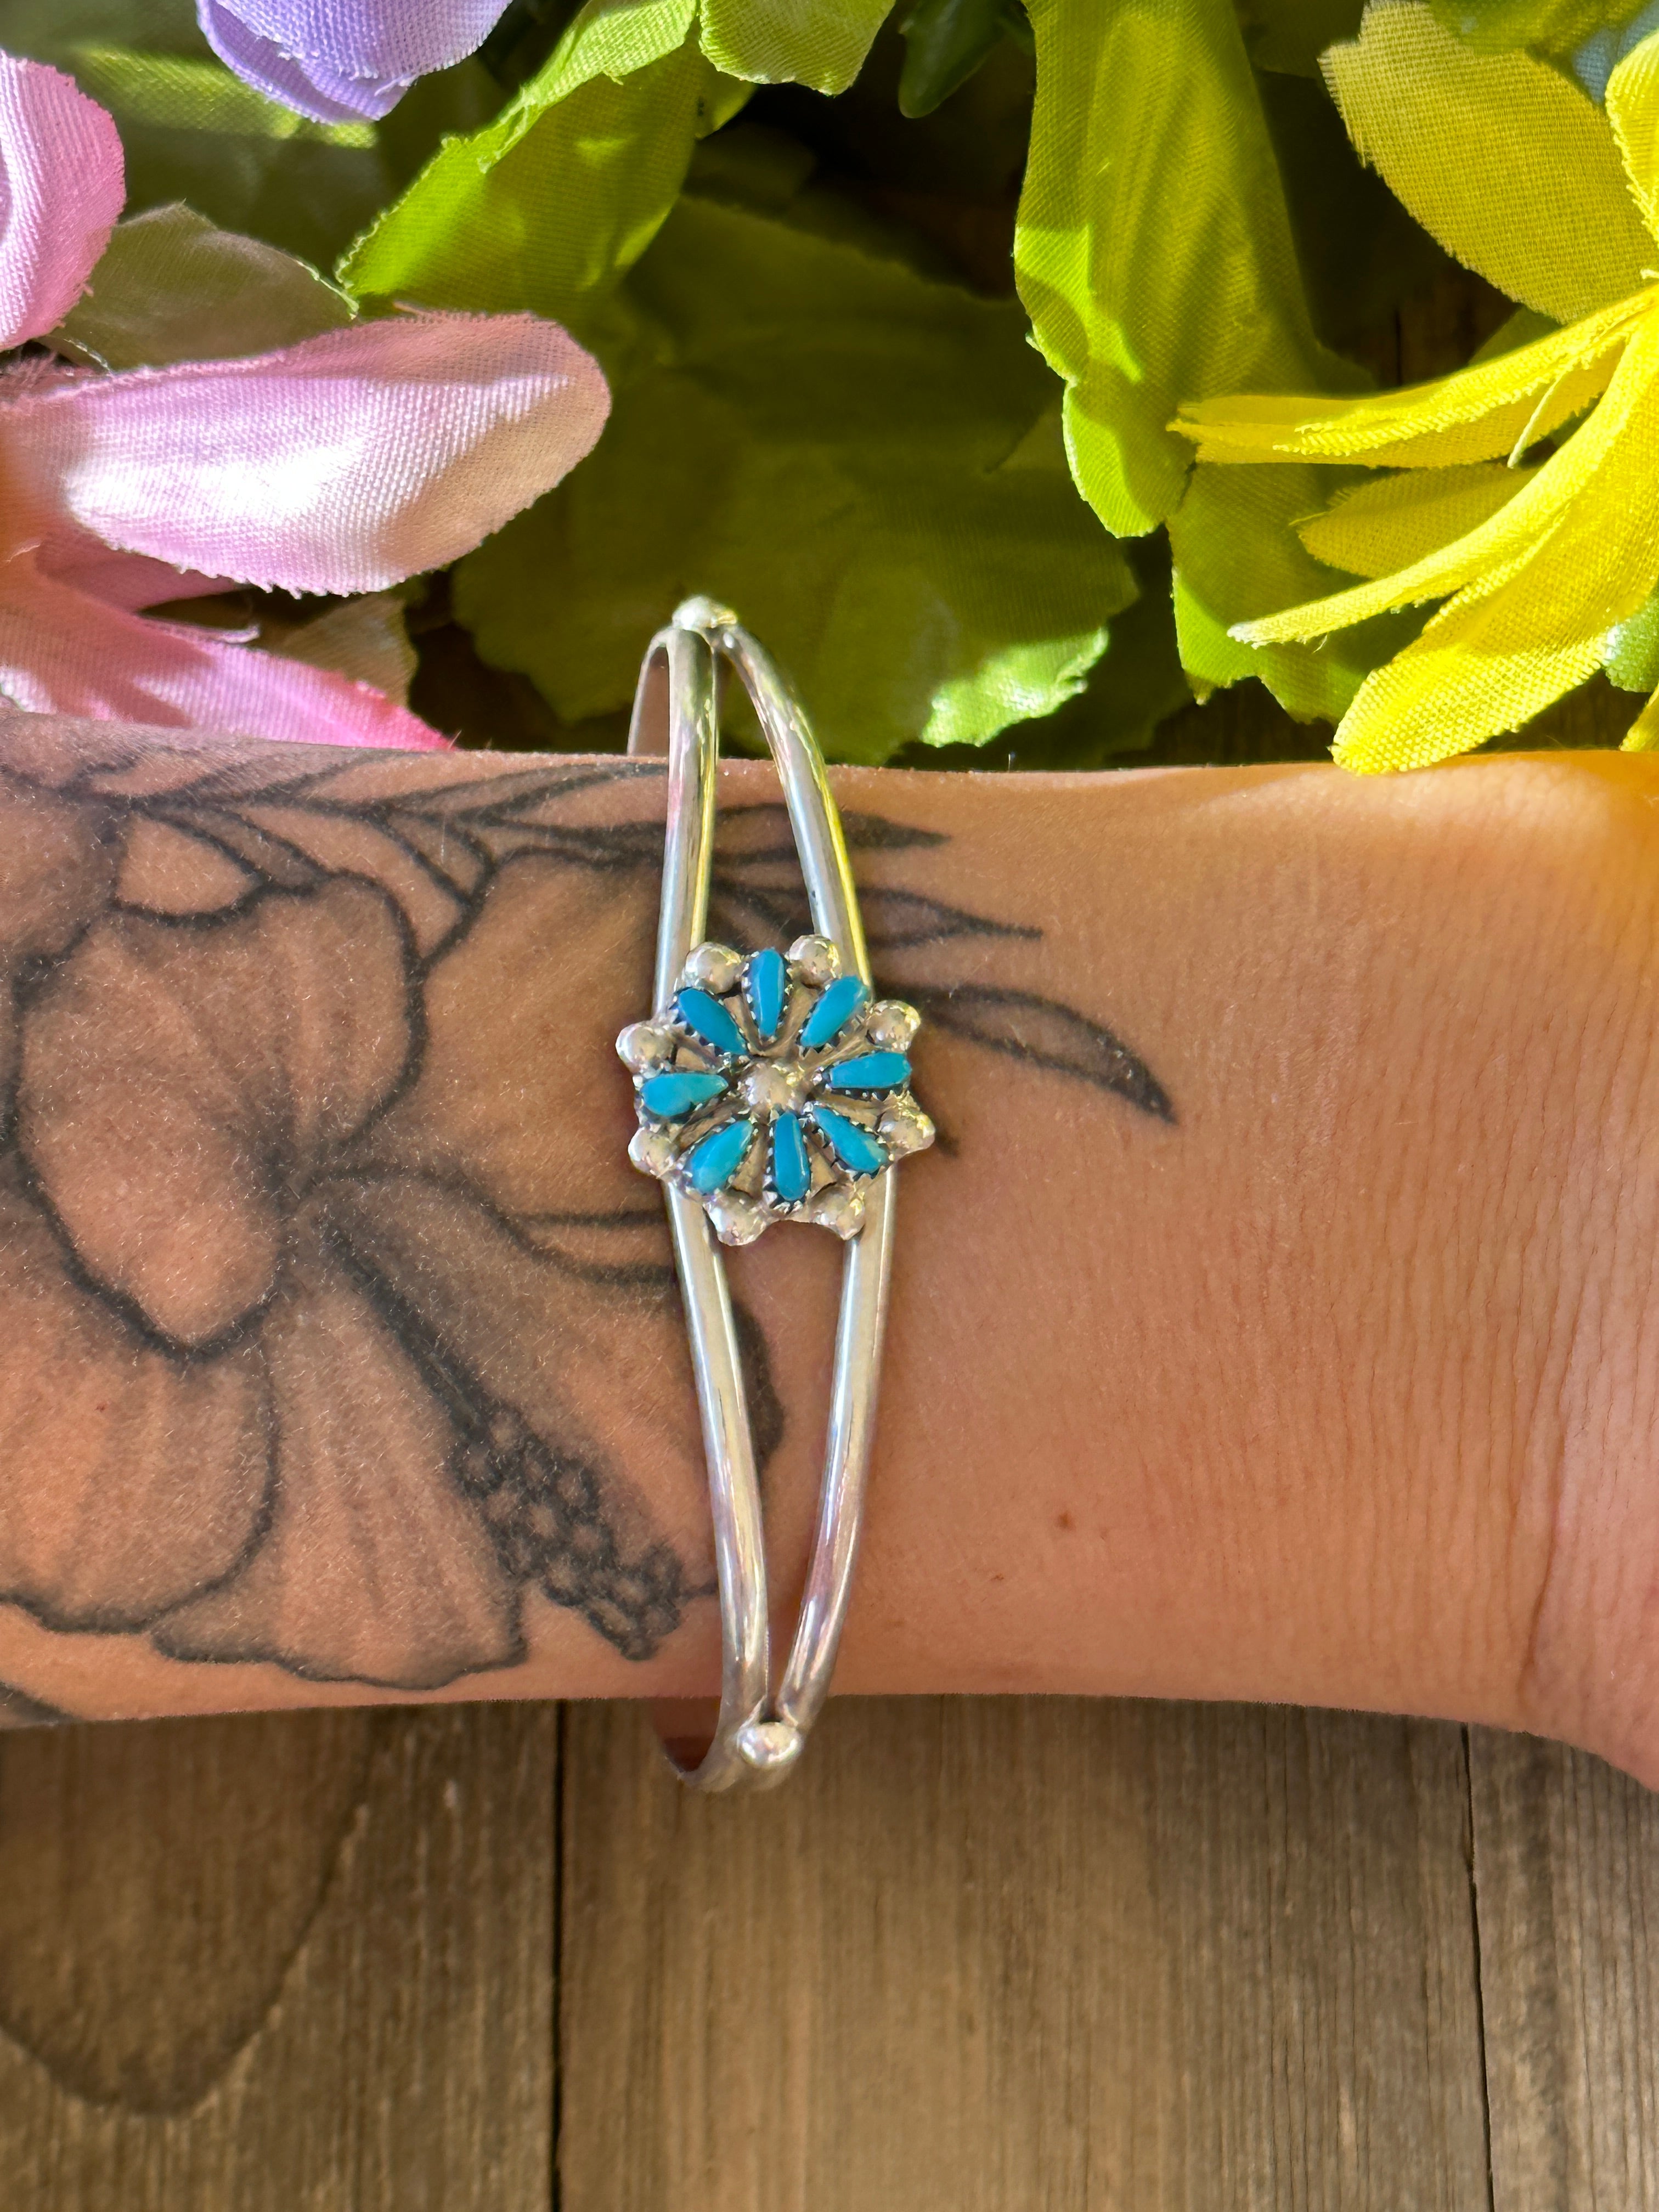 Zuni Made Turquoise & Sterling Silver Cuff Bracelet